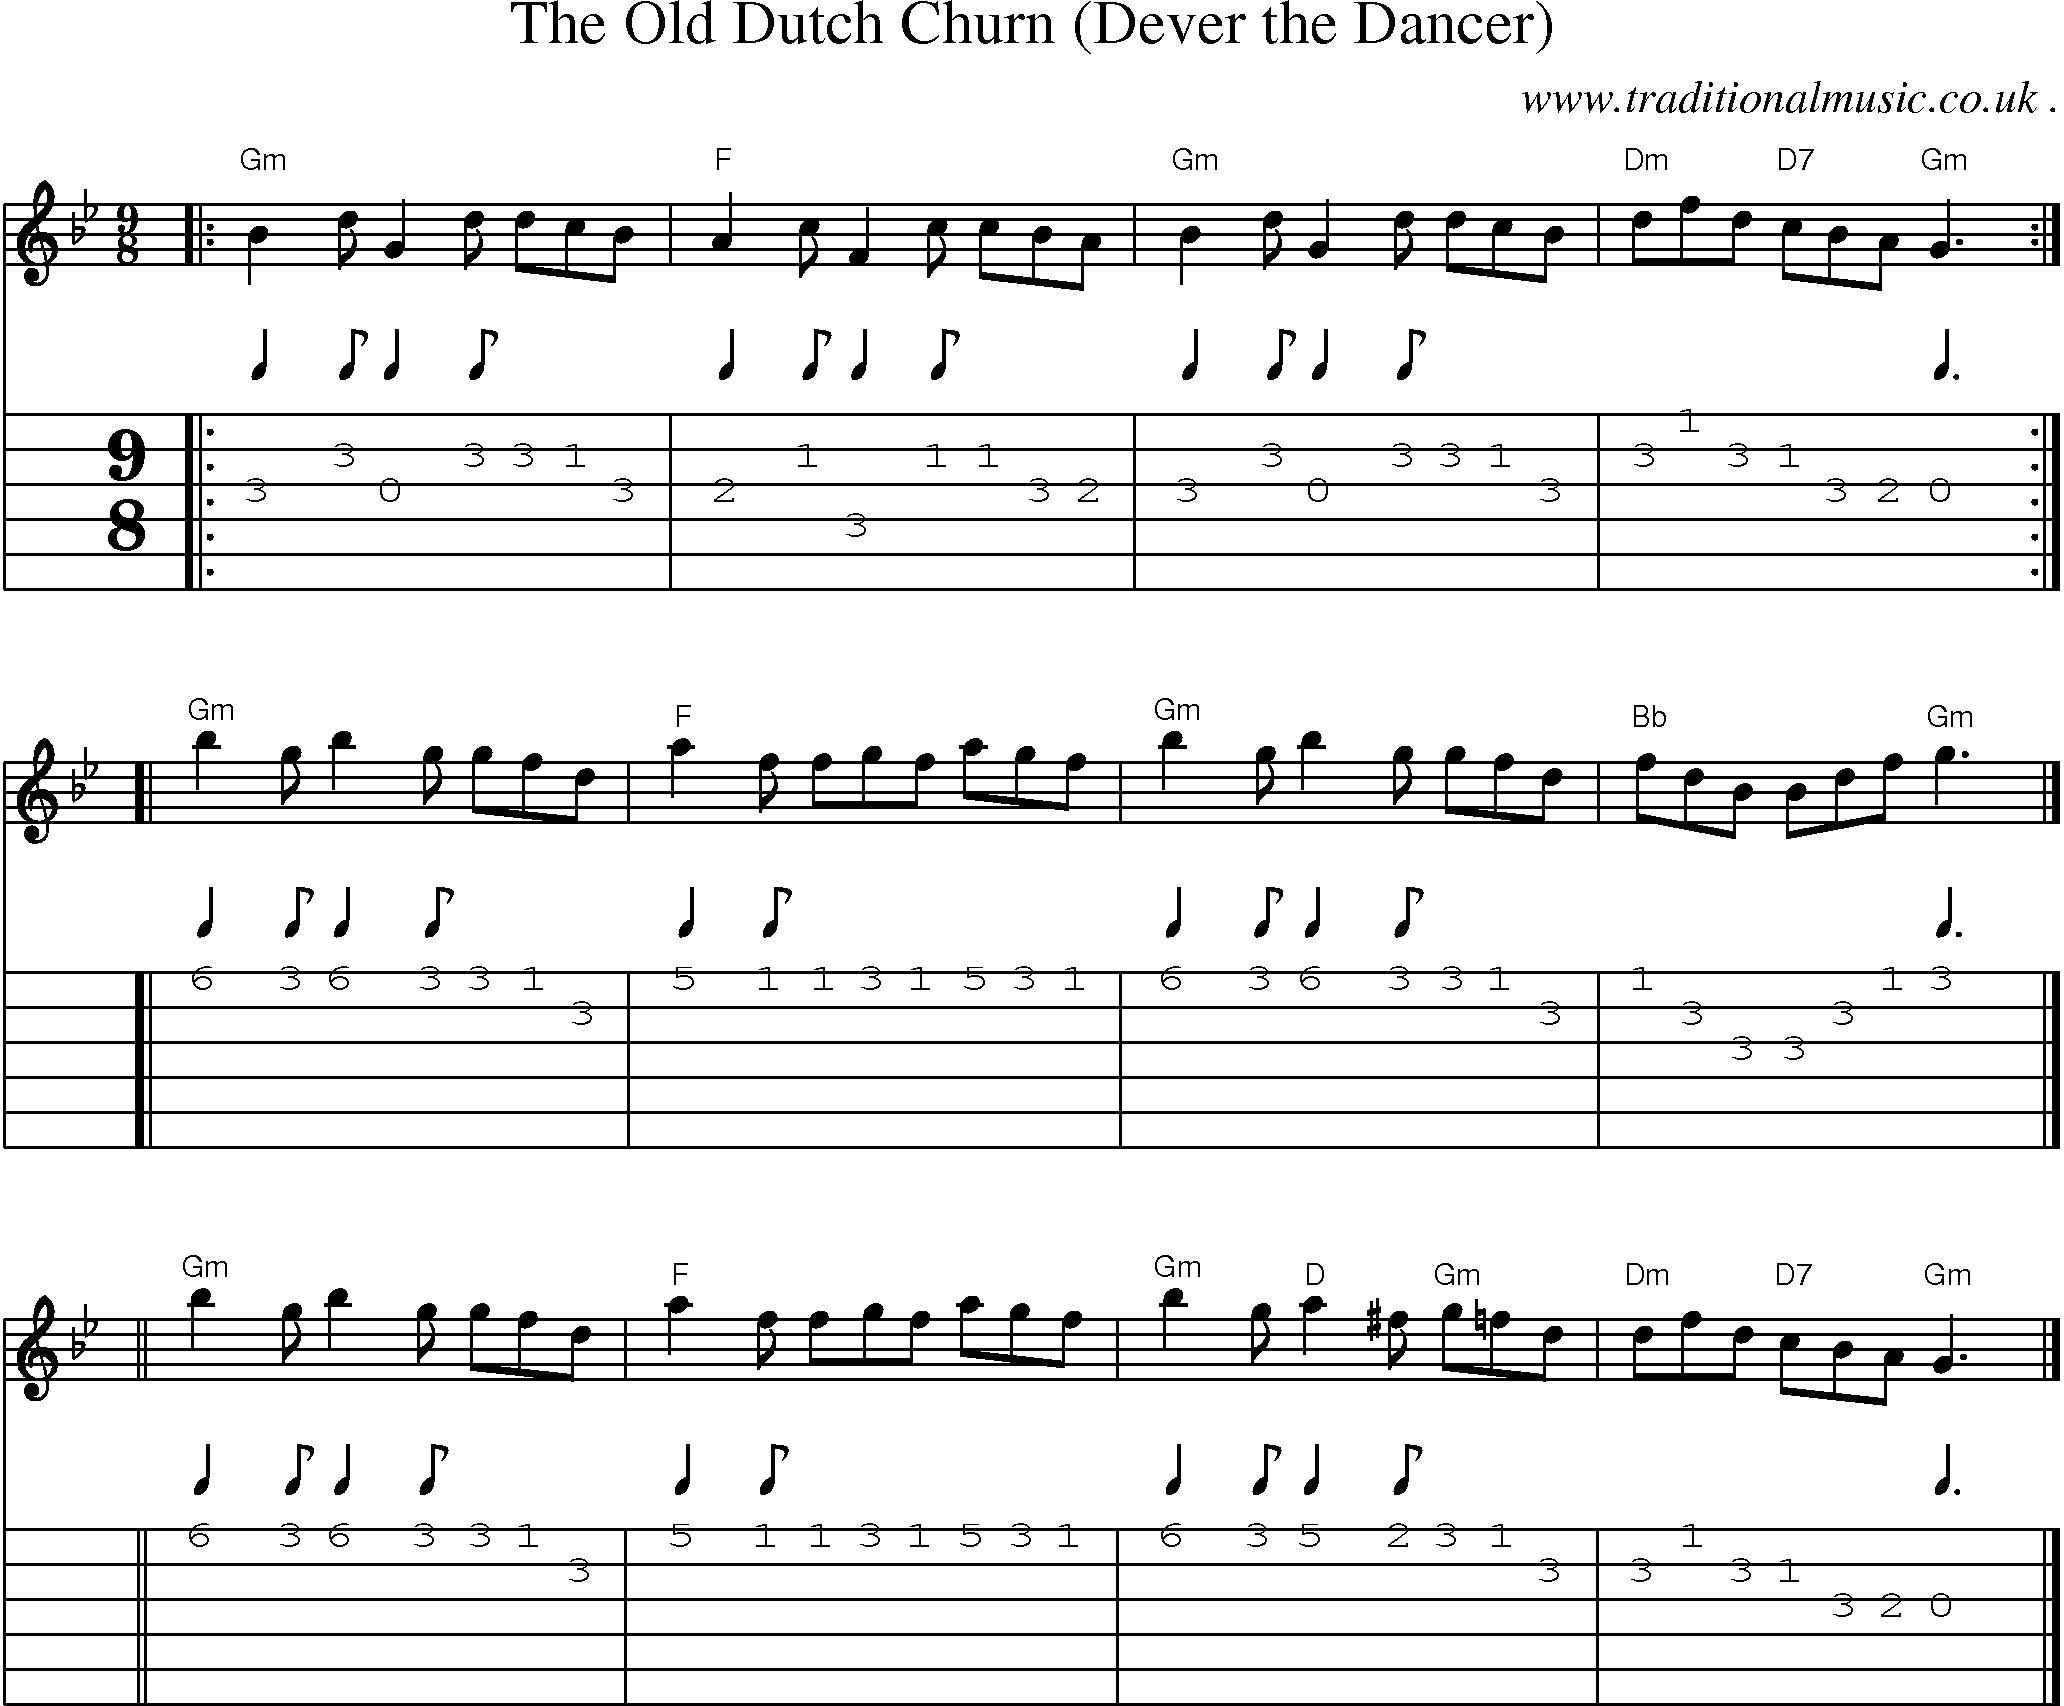 Sheet-music  score, Chords and Guitar Tabs for The Old Dutch Churn Dever The Dancer